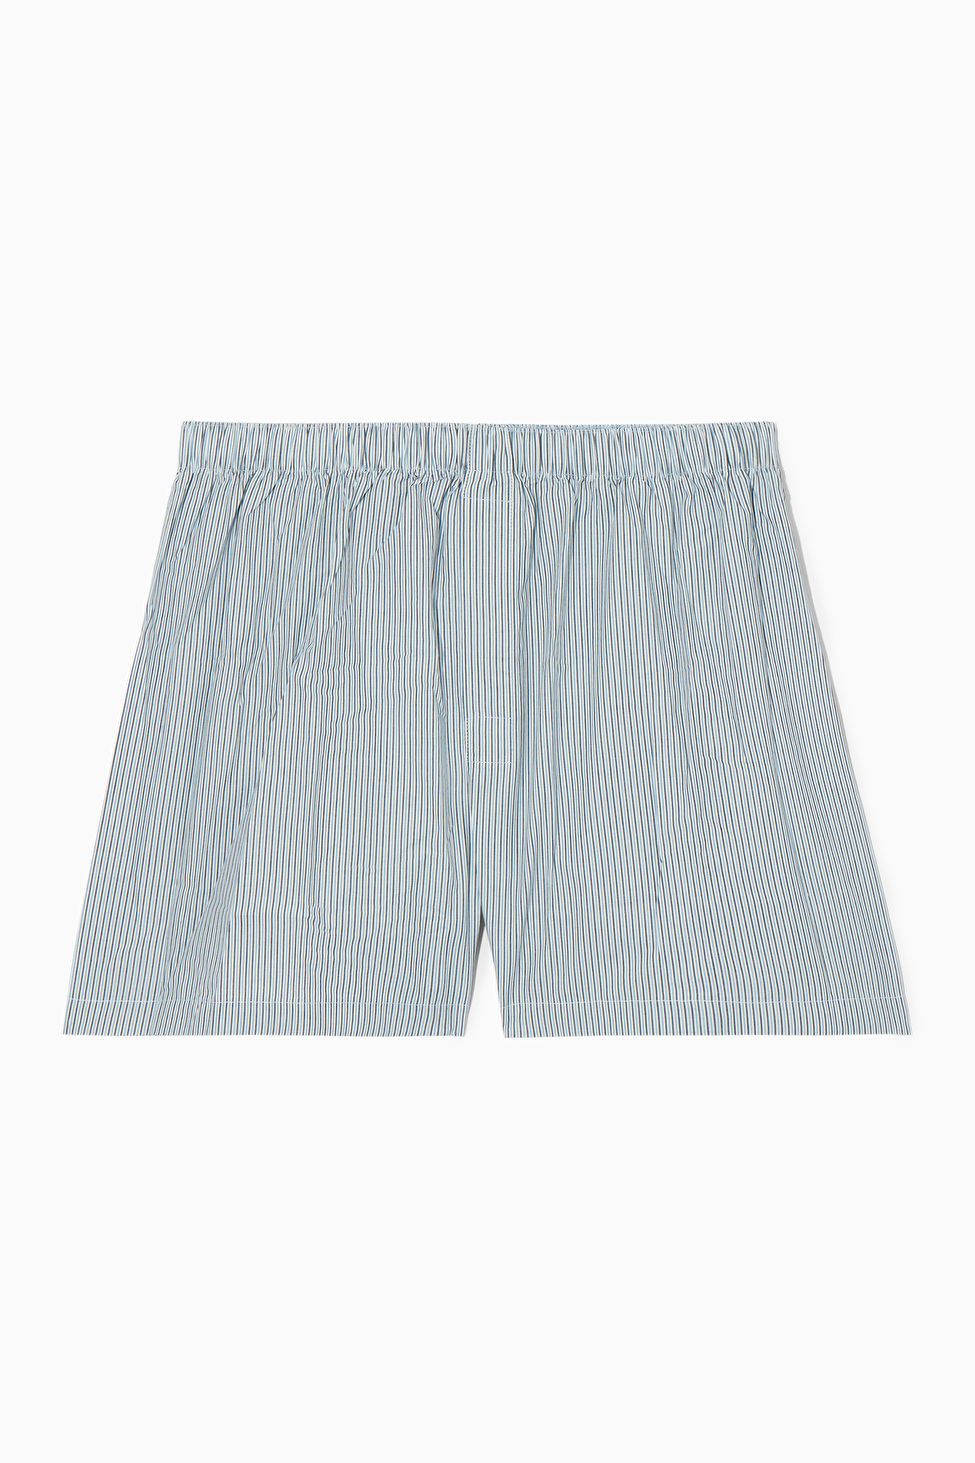 STRIPED BOXER SHORTS - LIGHT BLUE / STRIPED - COS | COS UK